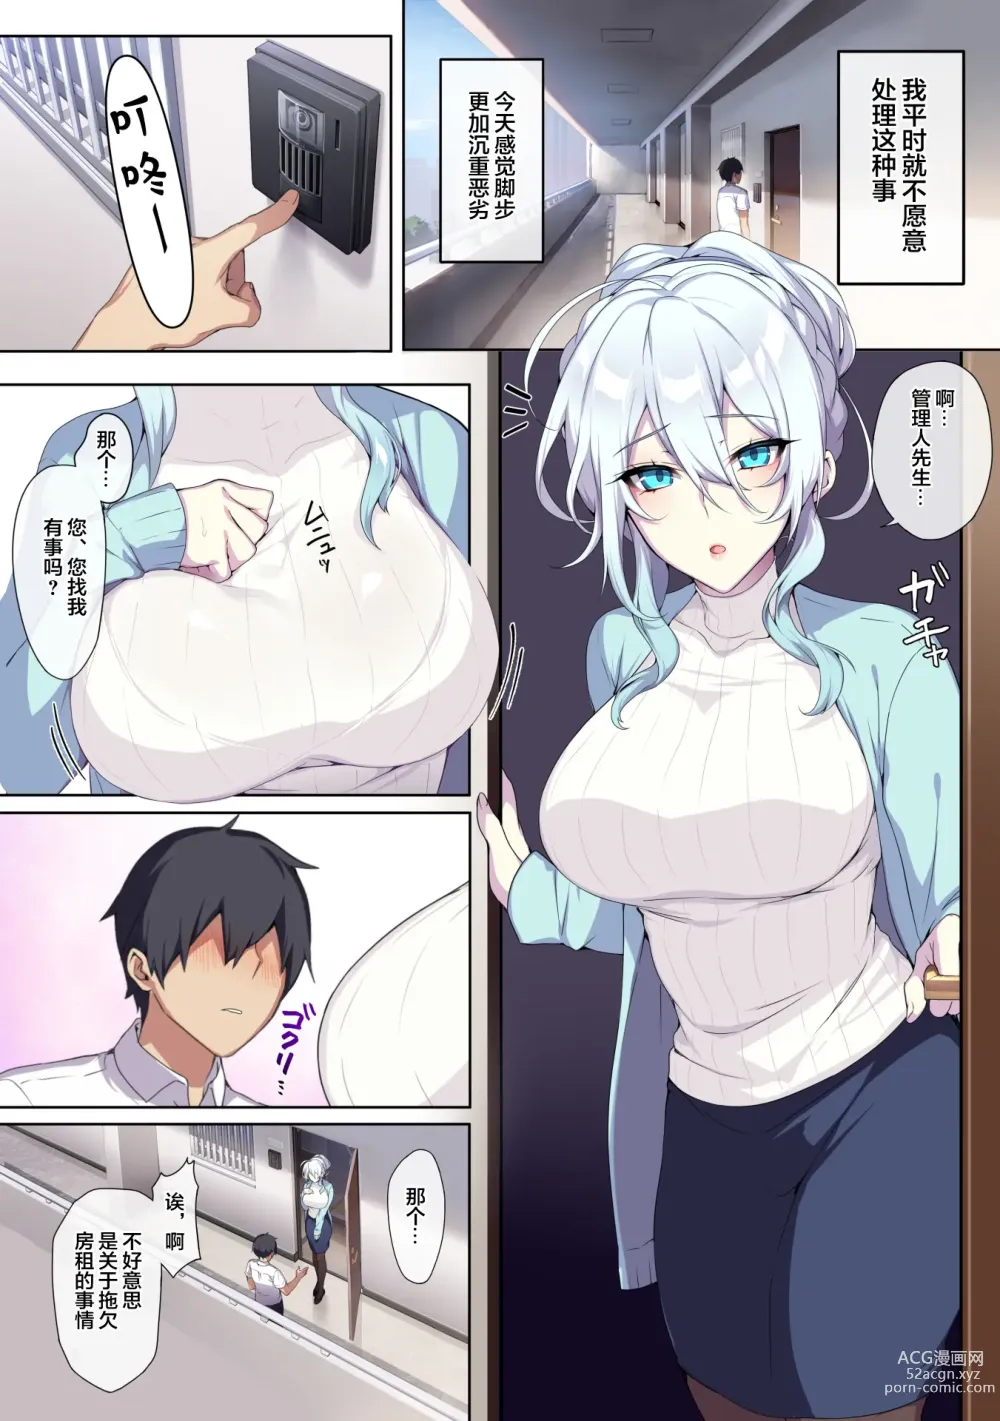 Page 7 of doujinshi the shy snow woman and the cursed ring